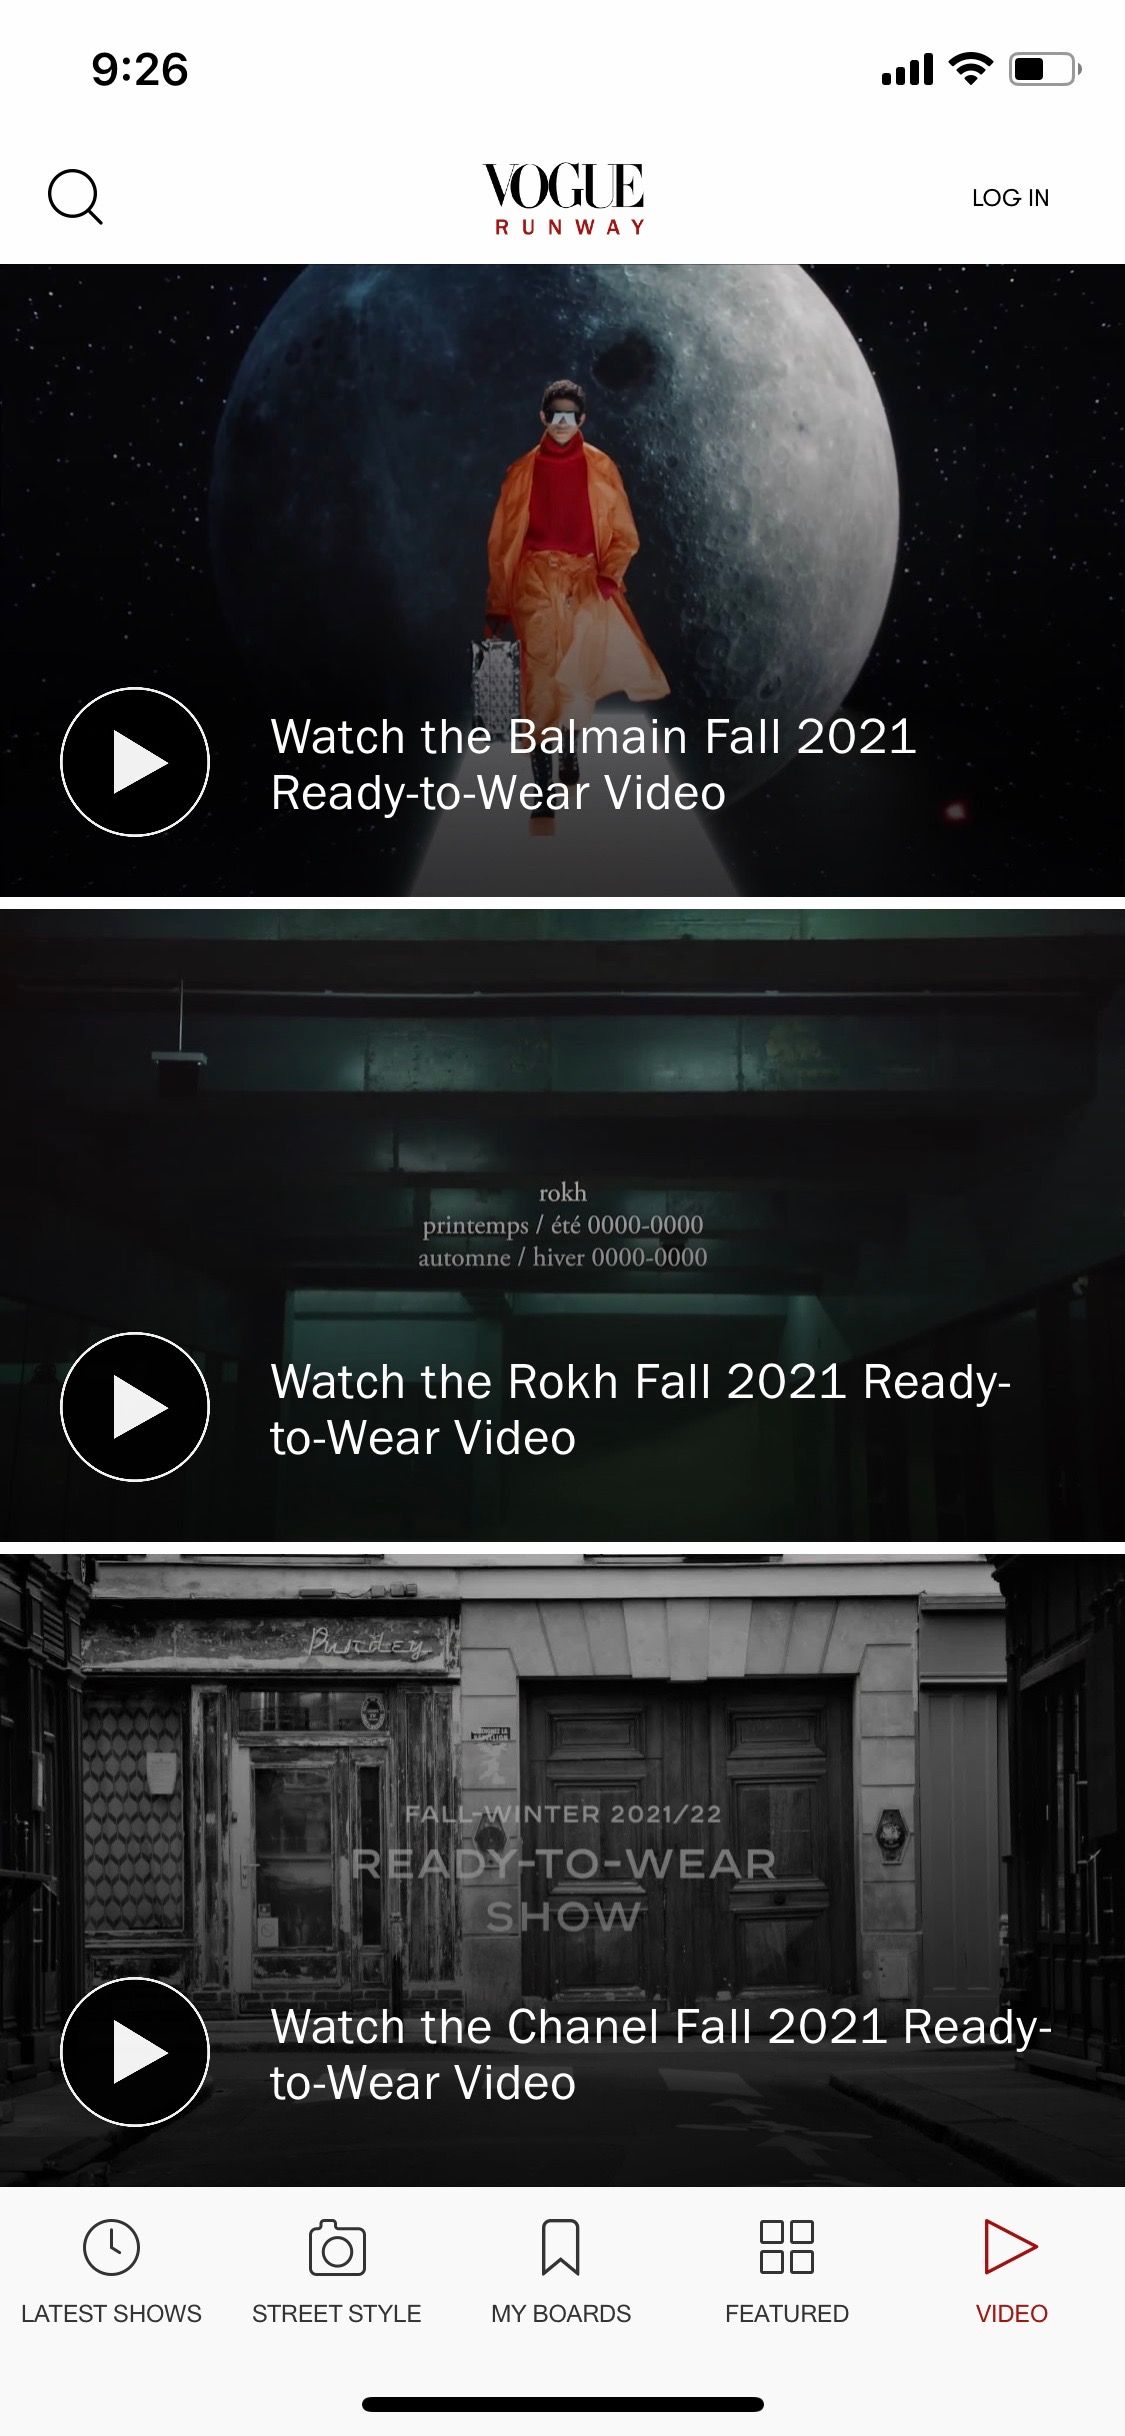 Fashion videos on latest fashion shows on the Vogue Runway app.